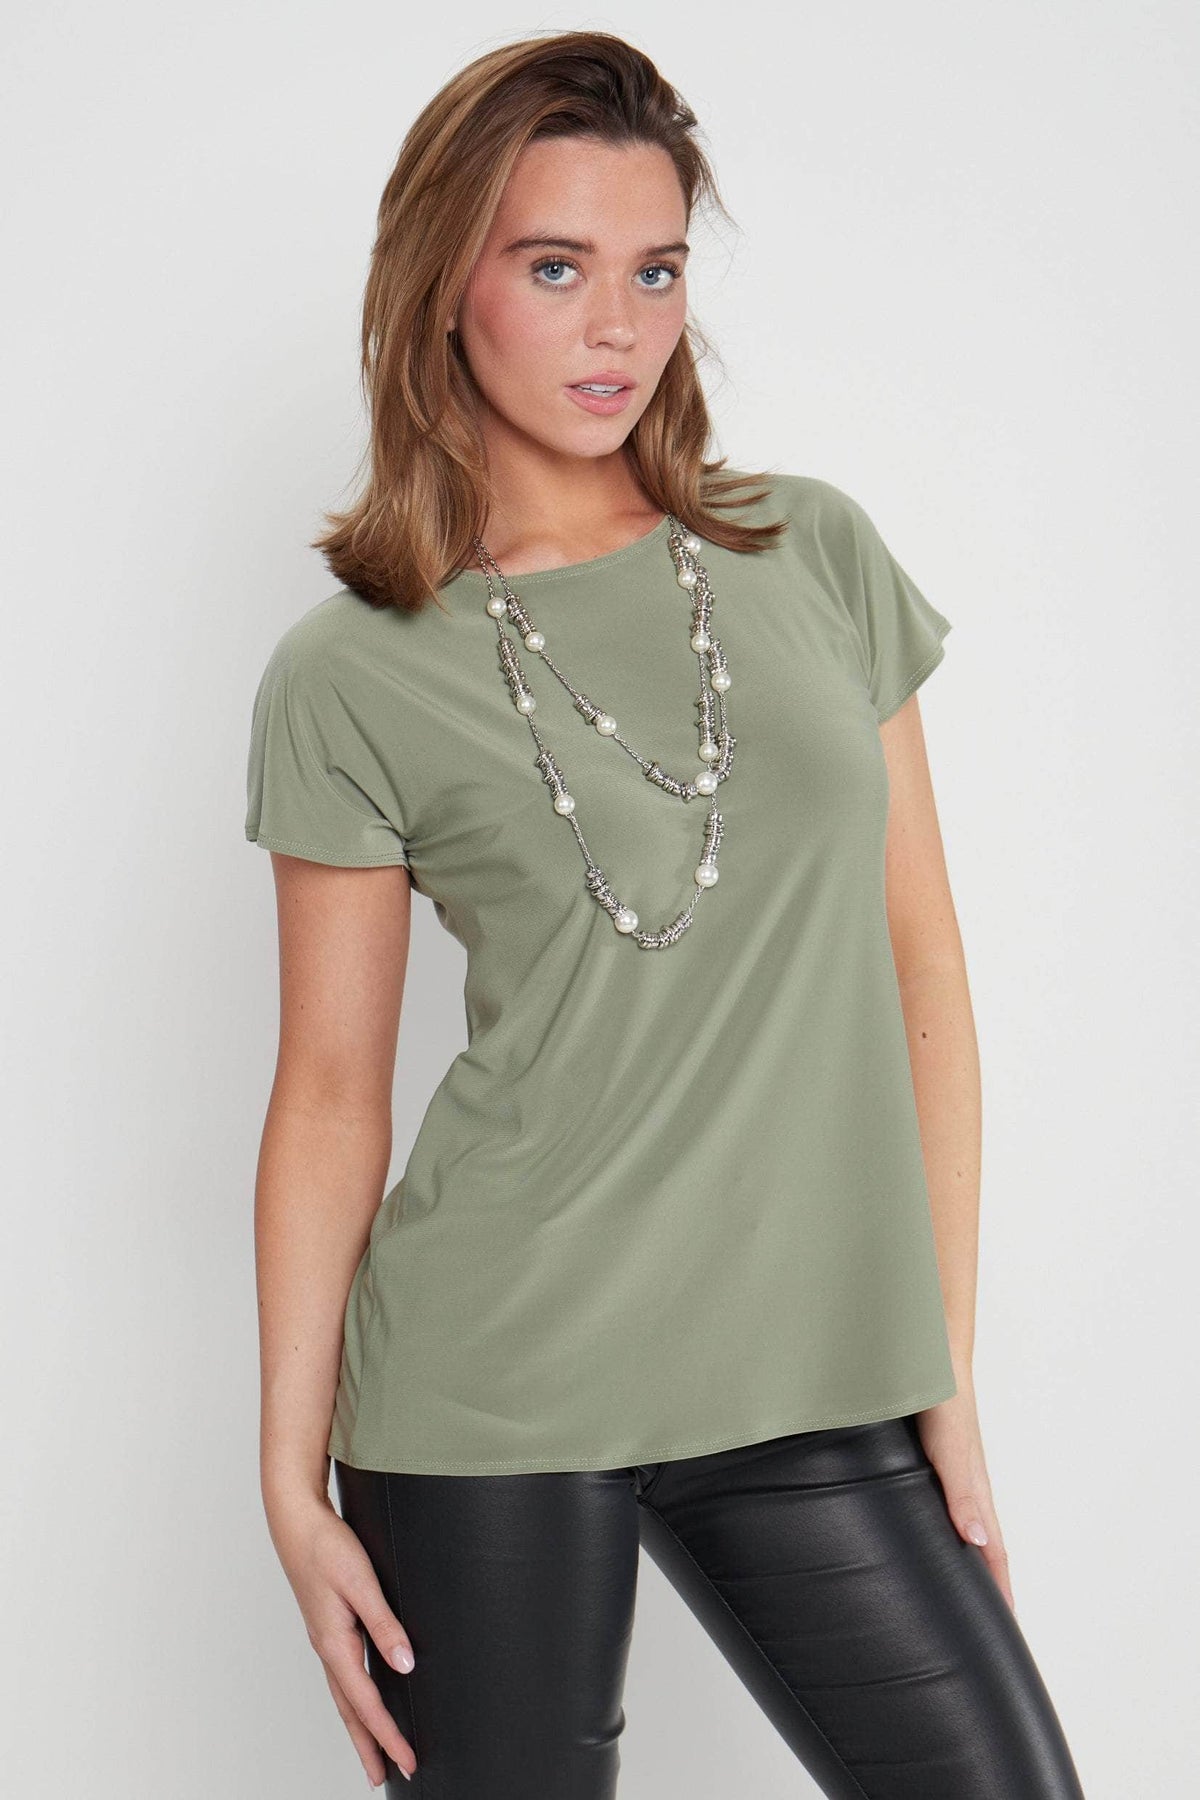 Saloos Top Khaki / 12 Essential Extended-Shoulder Top with Necklace